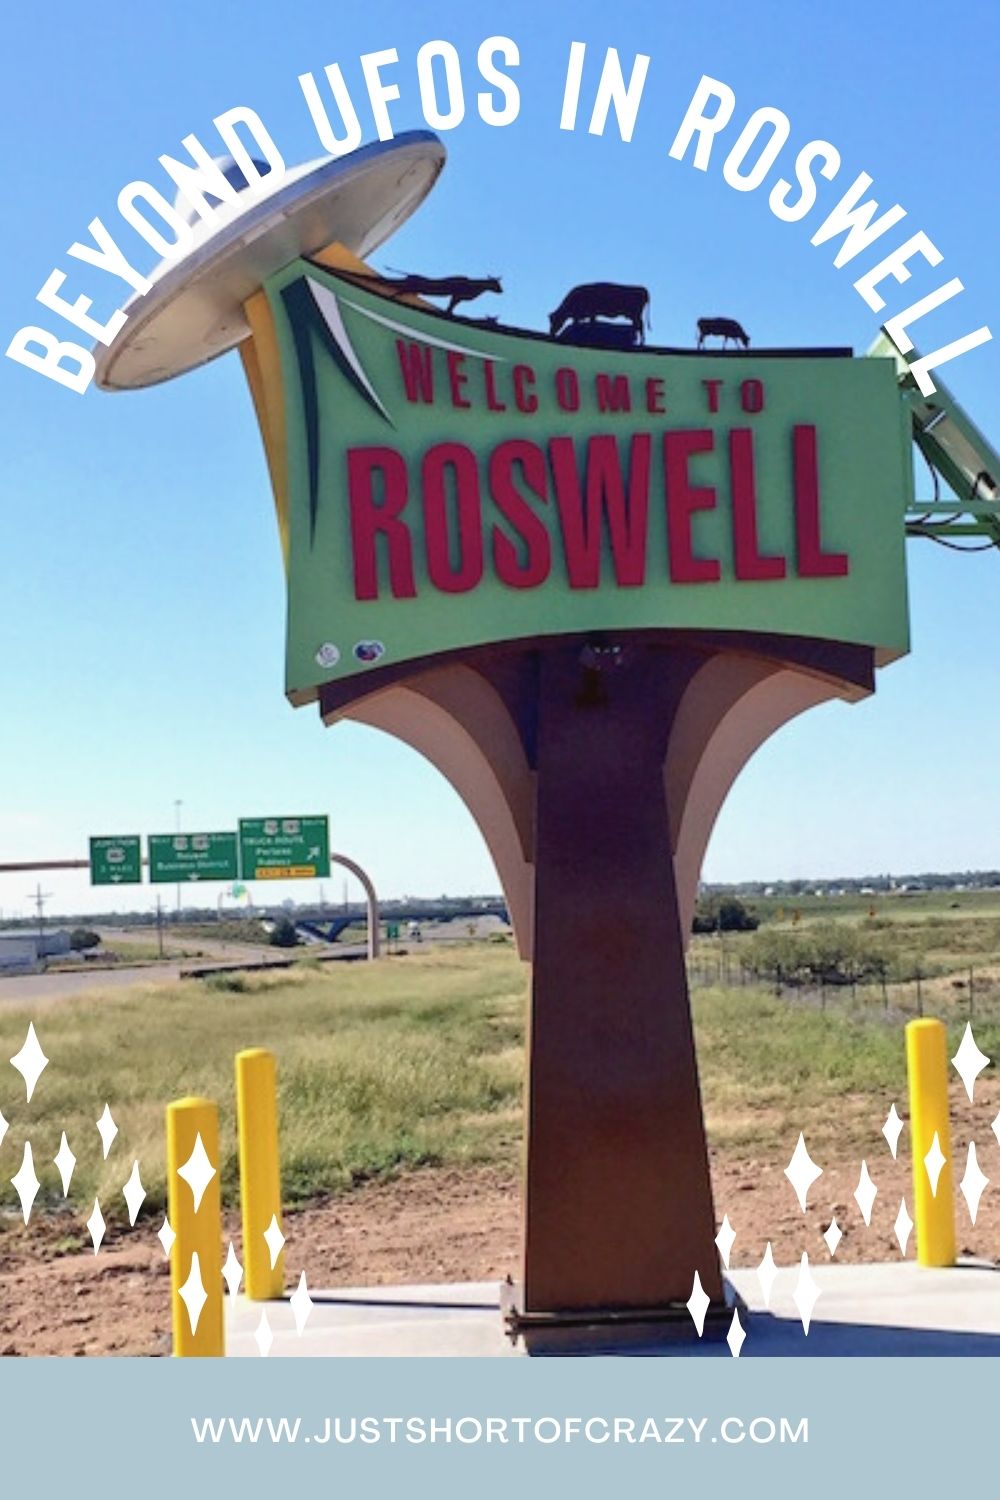 beyond ufos in roswell